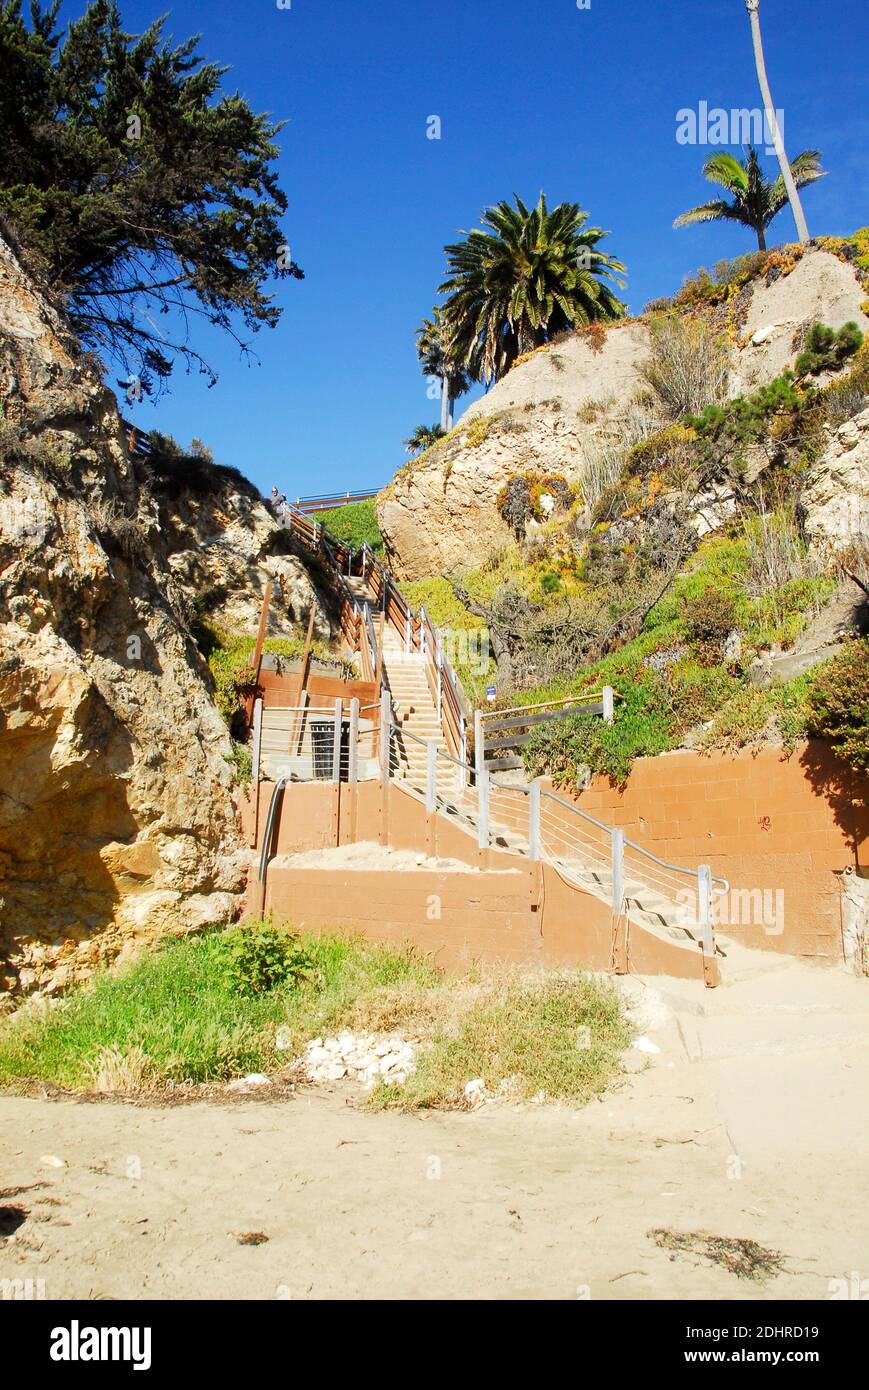 Stairs going down to the beach from clifftop hotel in Pismo Beach, famous for its Pismo Clams, beaches, and sand dunes. Stock Photo